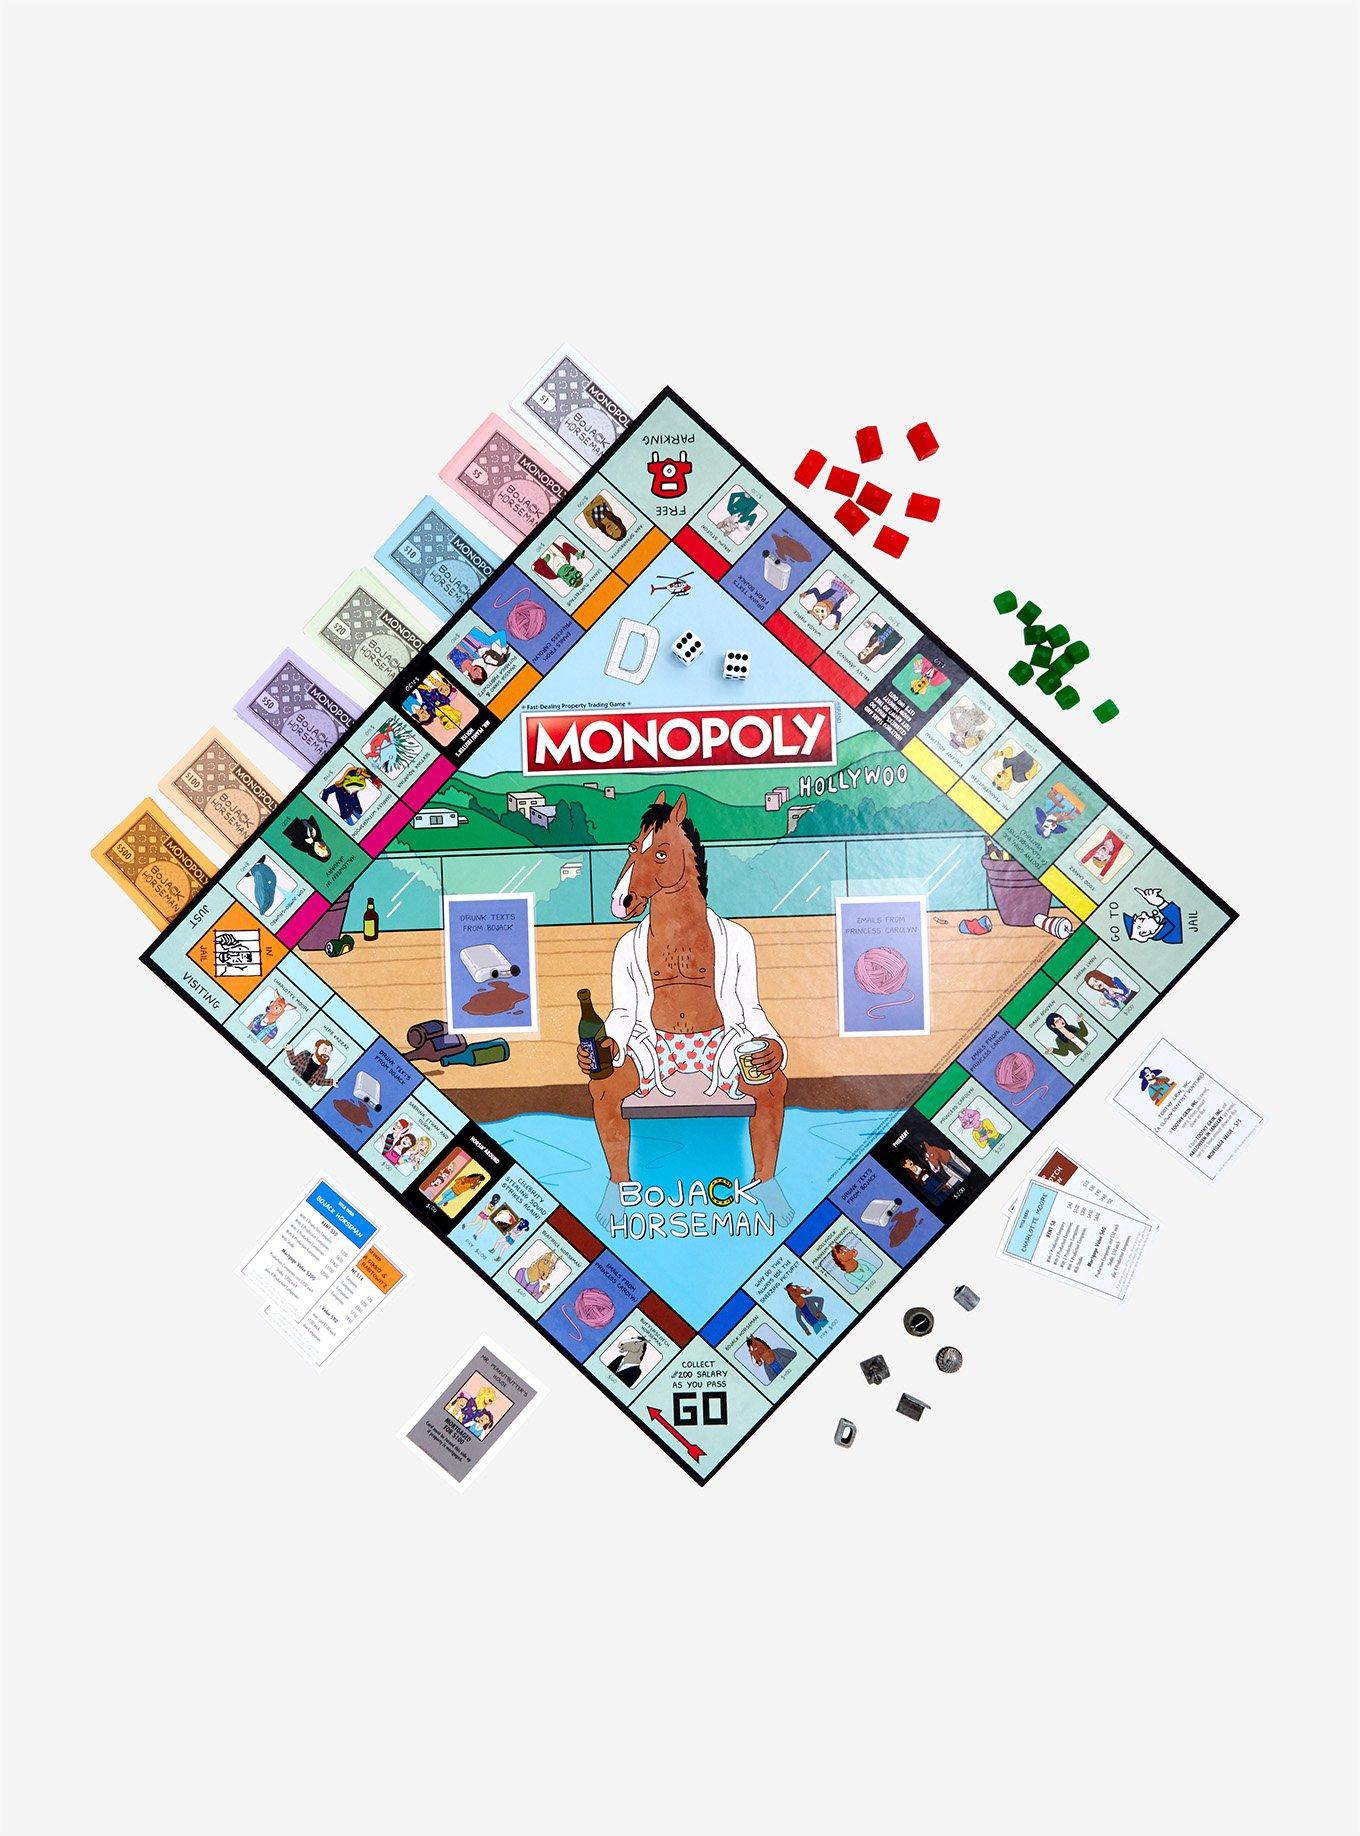 Shop for Monopoly  online at Freemans